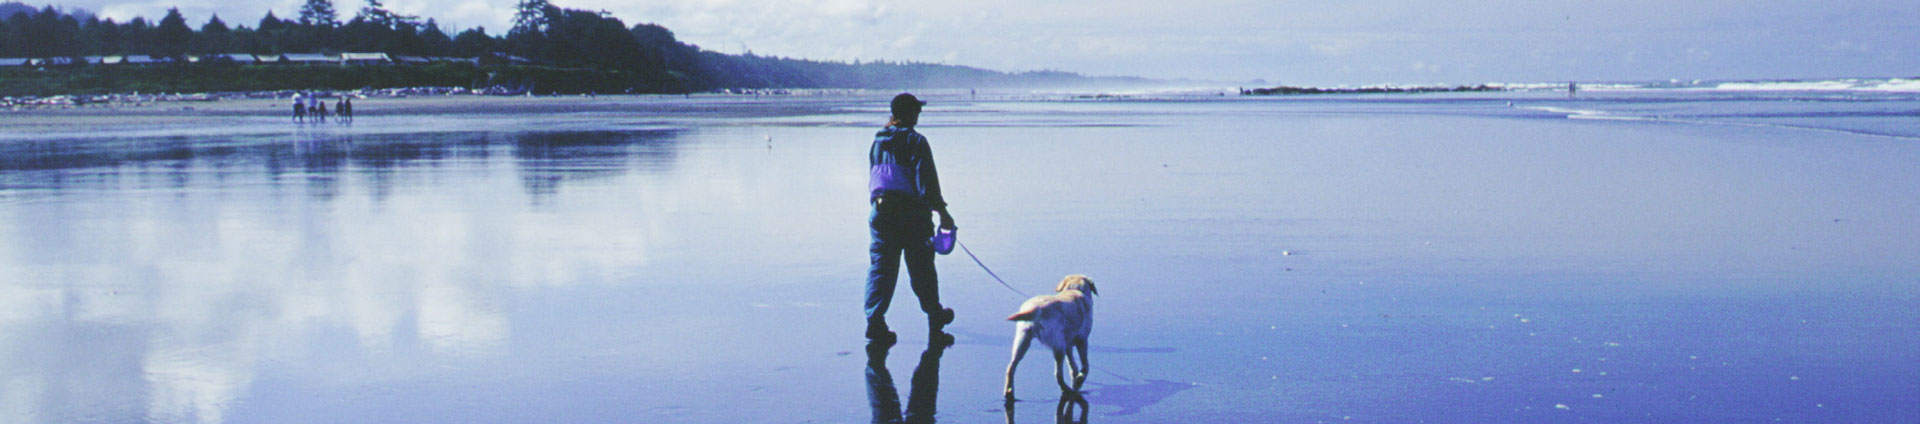 header image of person walking dog on beach